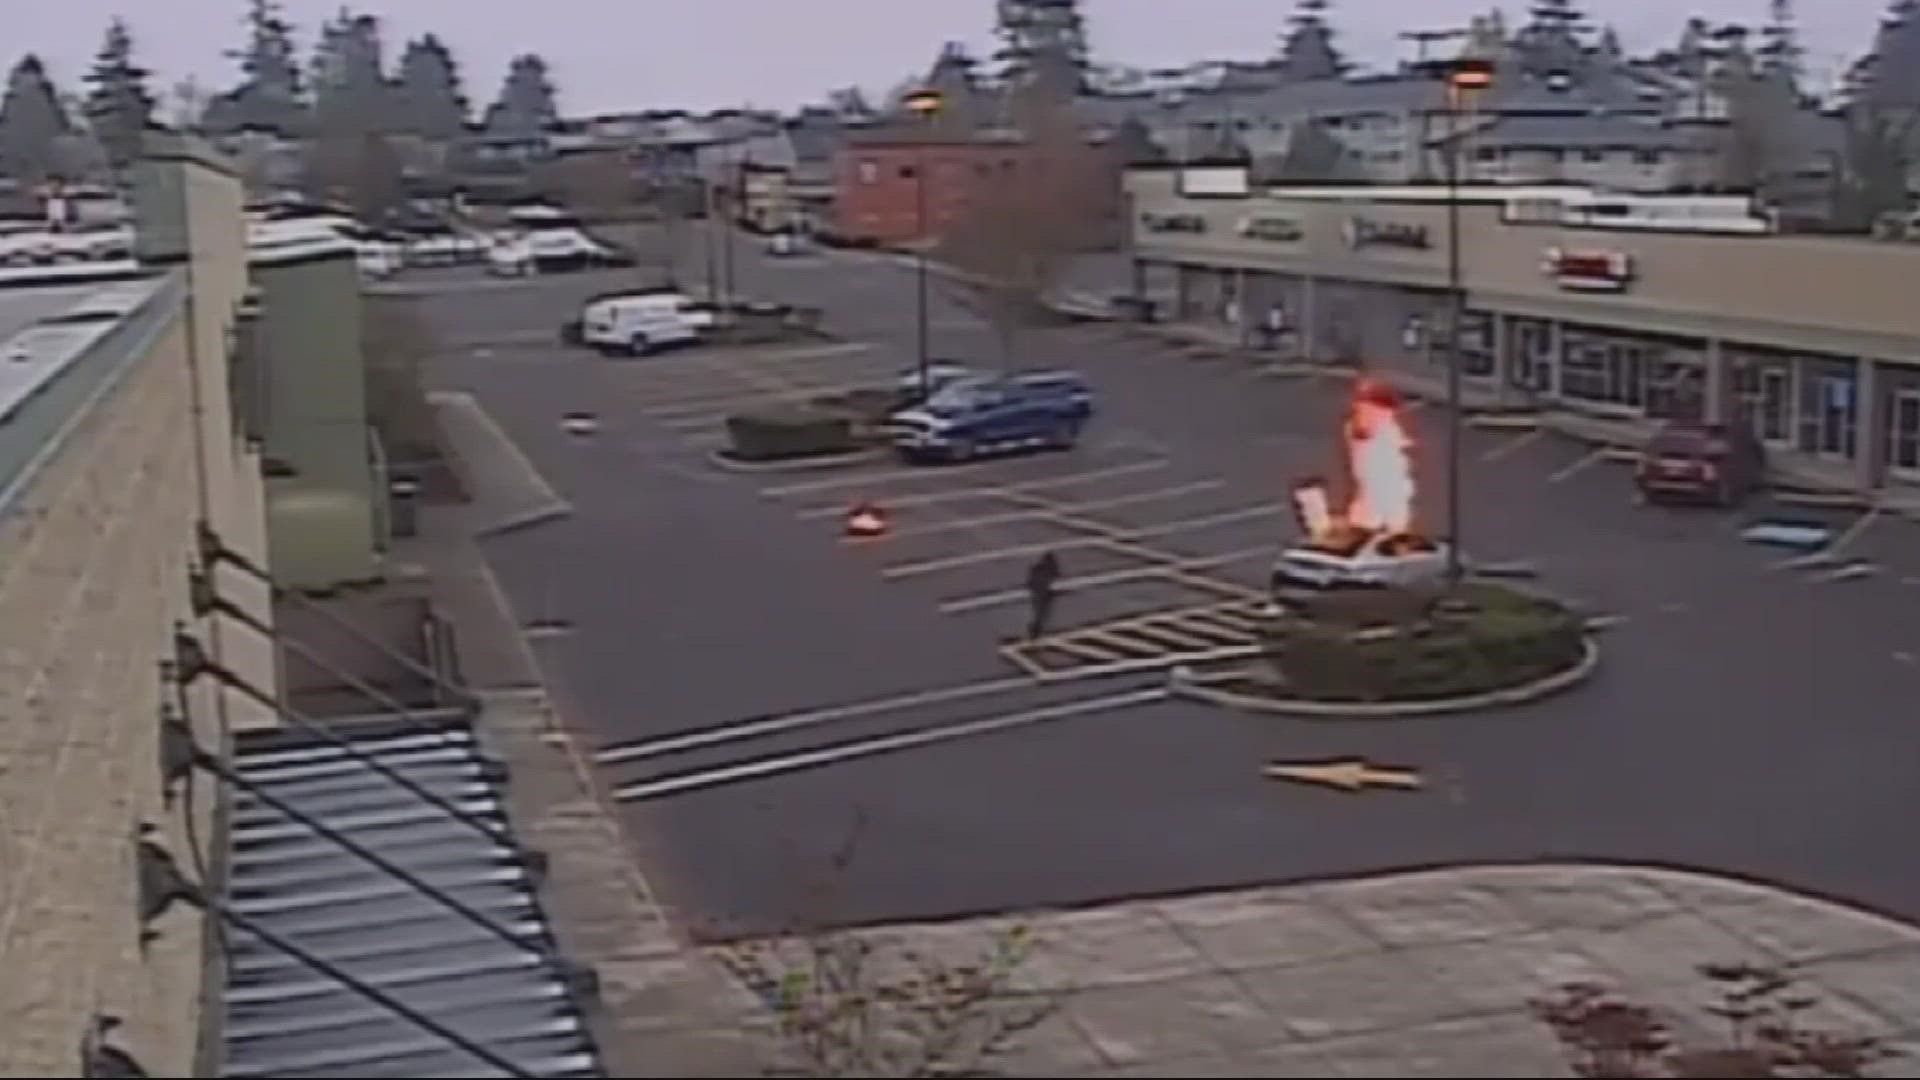 Authorities were called to a Fred Meyer in Beaverton for a car on fire. Surveillance shows someone seemingly setting the car on fire.